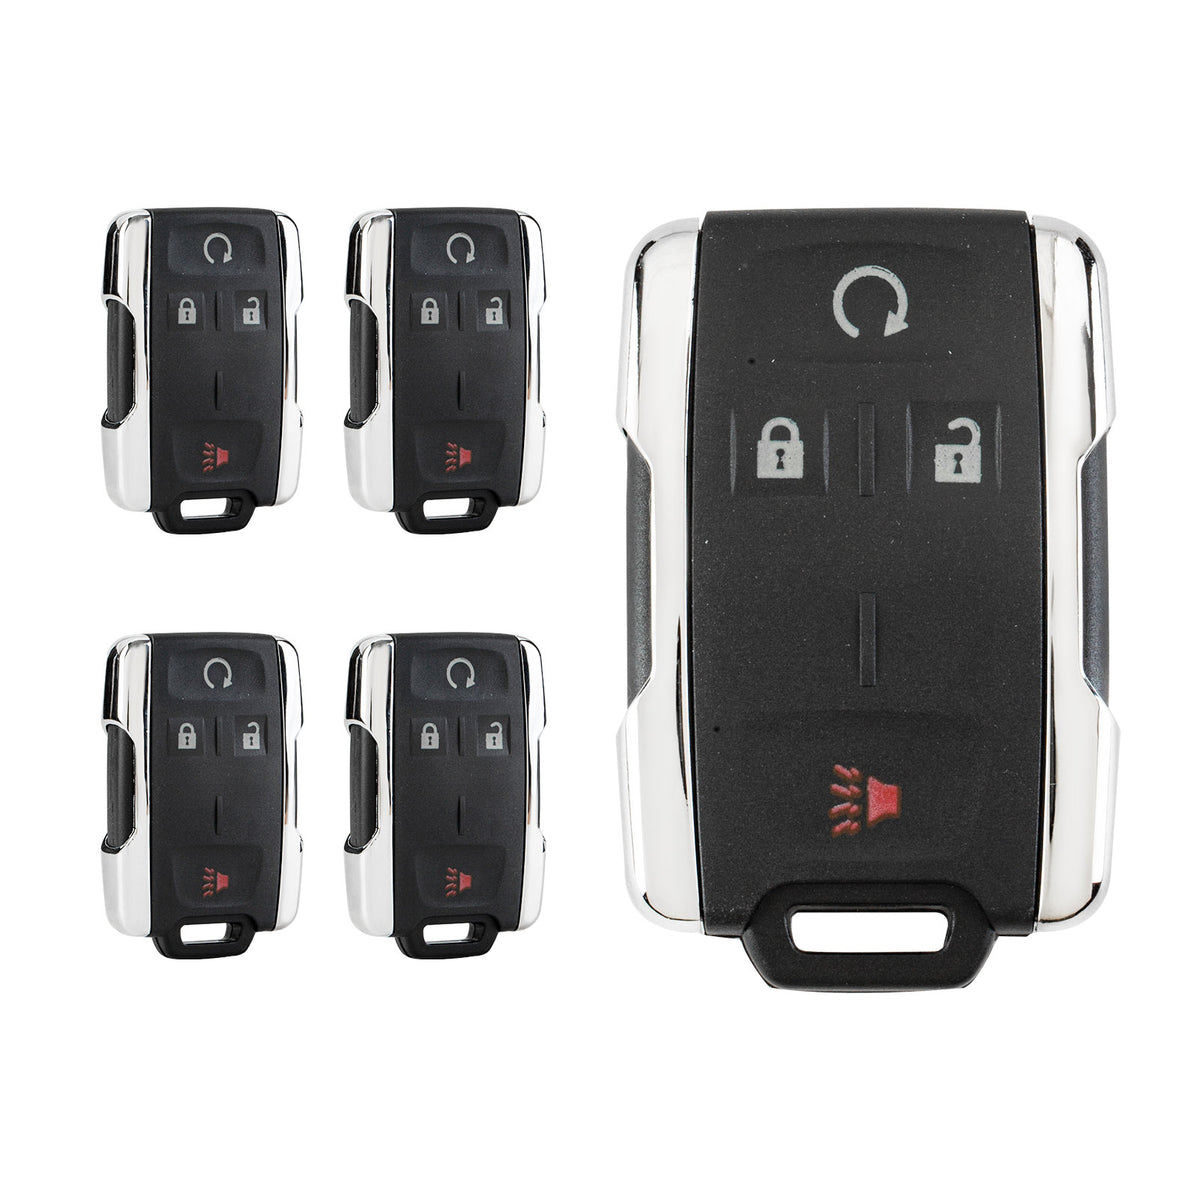 Lots of 5 Remote Car Key Fob Replacement for GMC M3N-32337100 13577770 13580082 fits 2014 2015 2016 2017 Sierra 4 Button